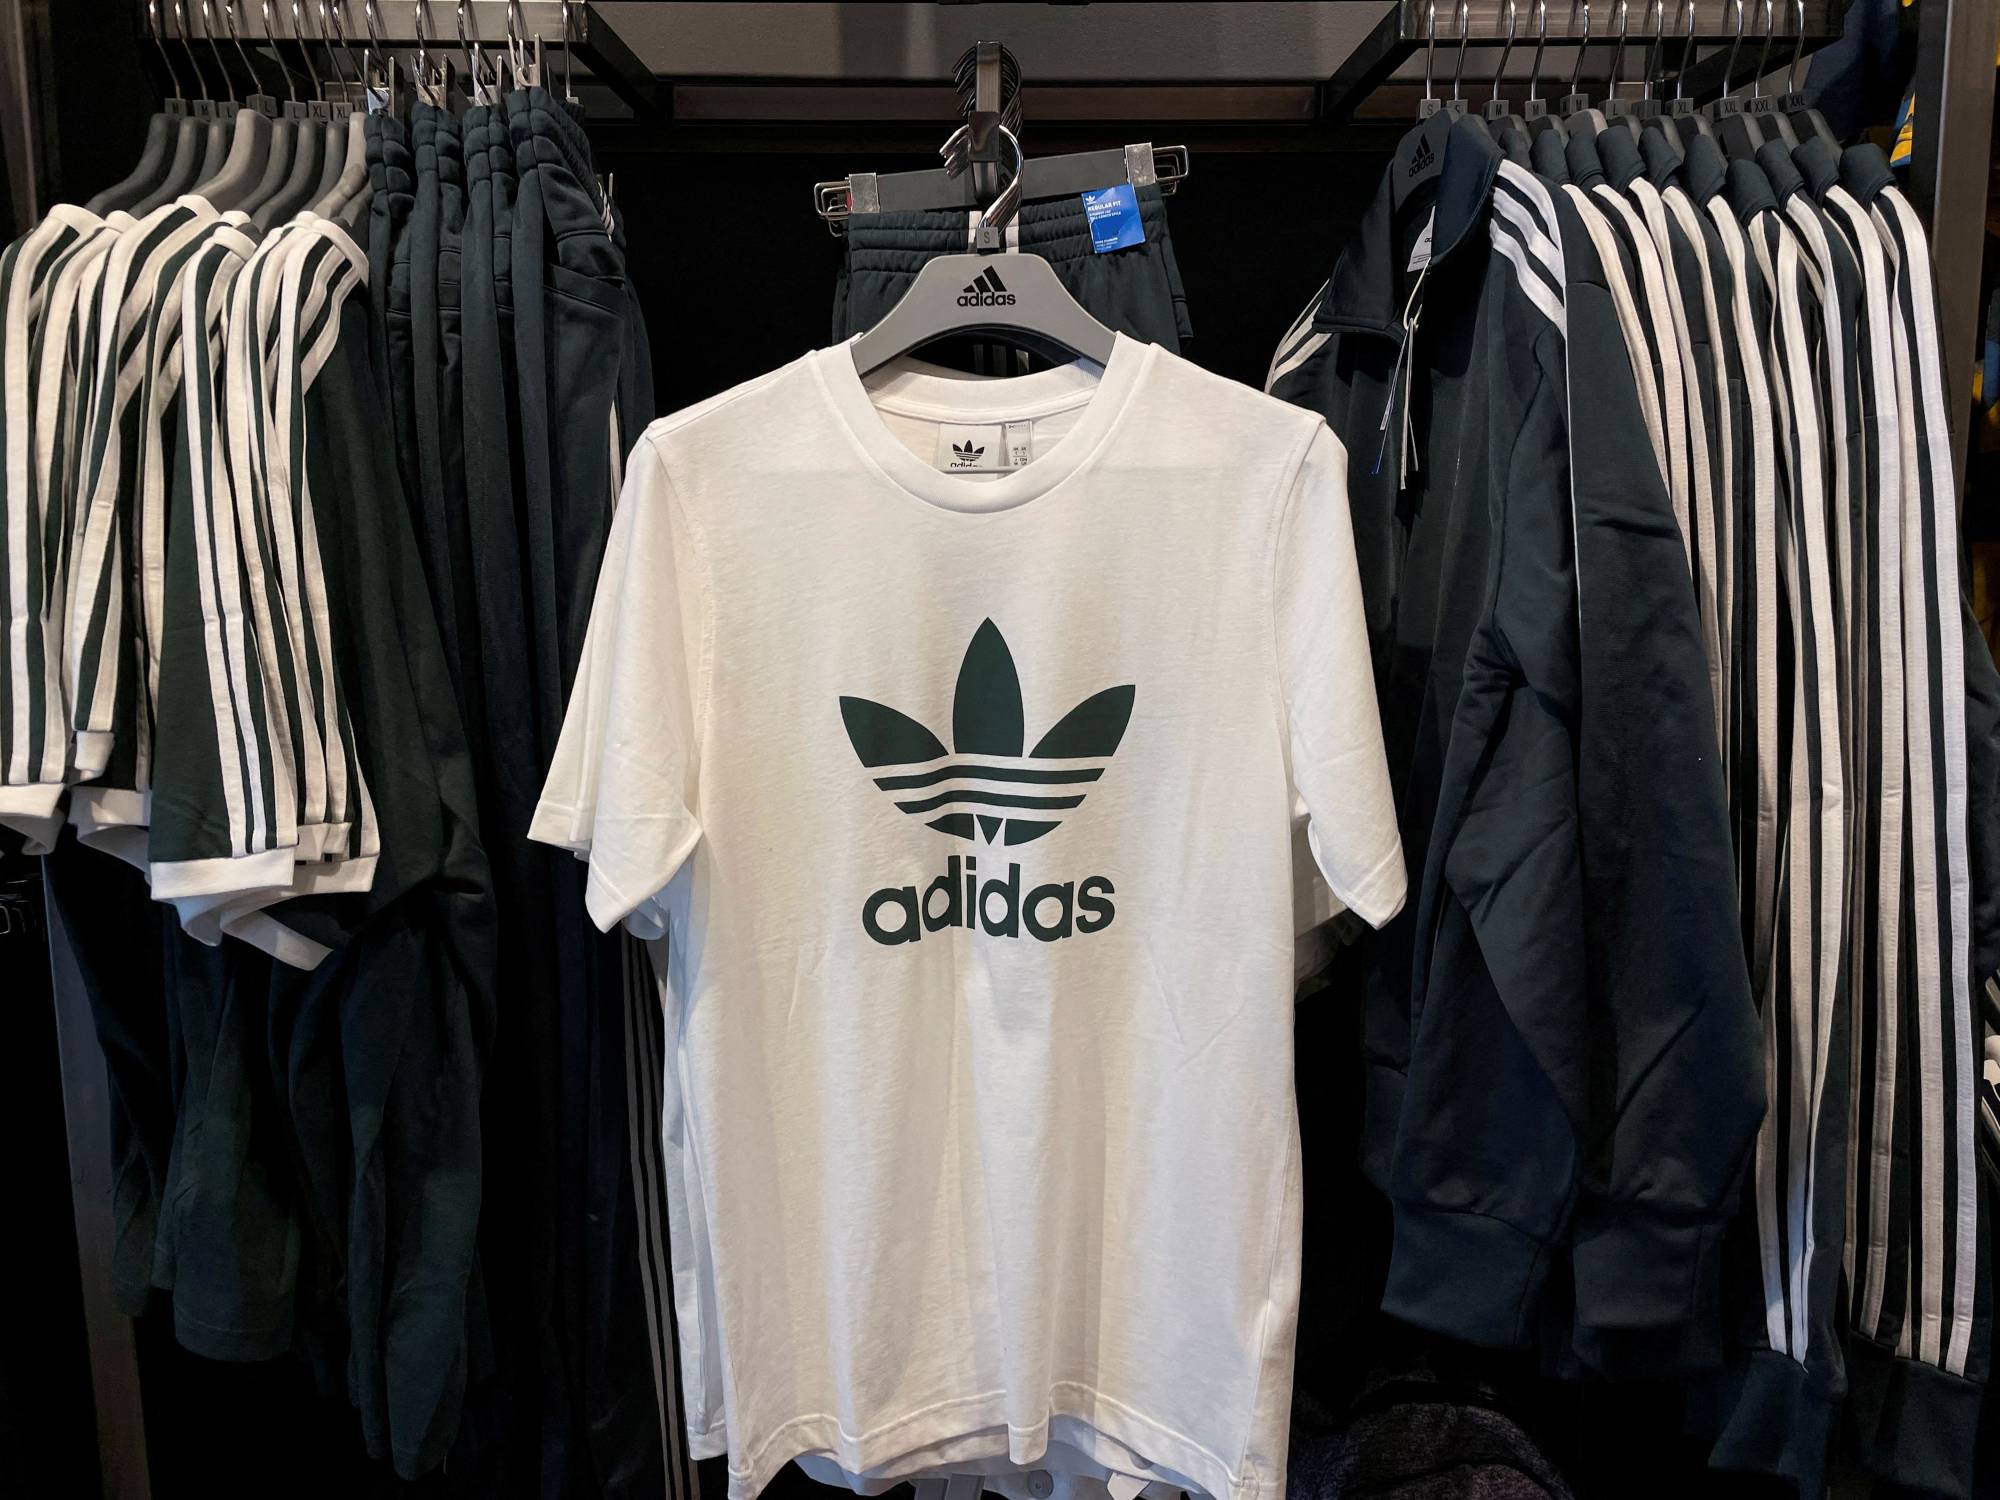 juntos Atticus Prosperar Adidas and Nike must pick up the pieces after antisemitism ruins deals |  The Japan Times